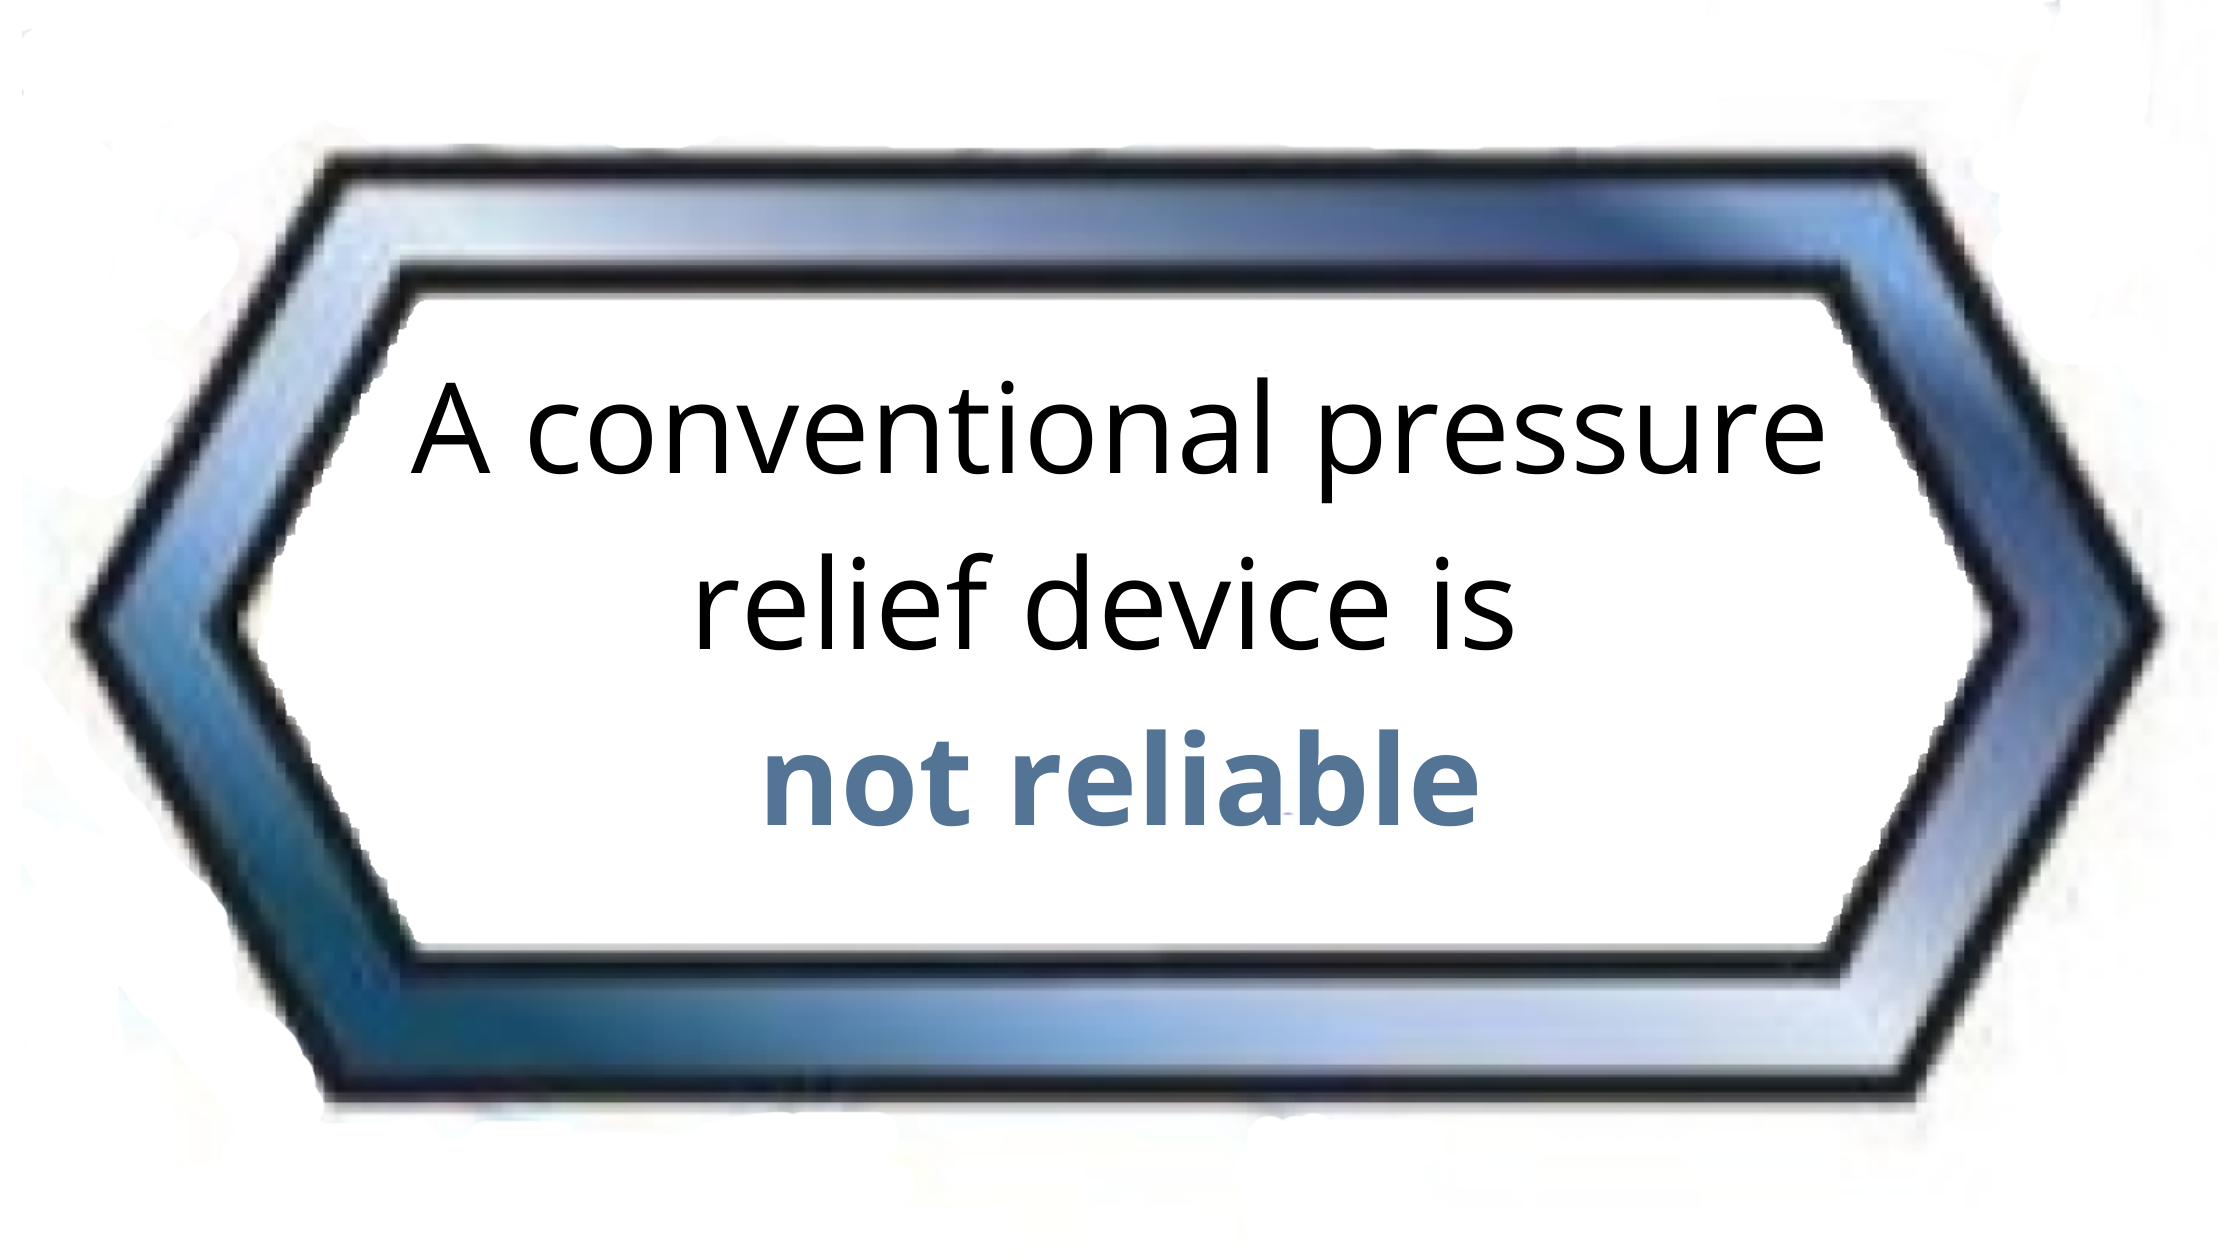 A conventional pressure relief device is “not possible or practical” (1)